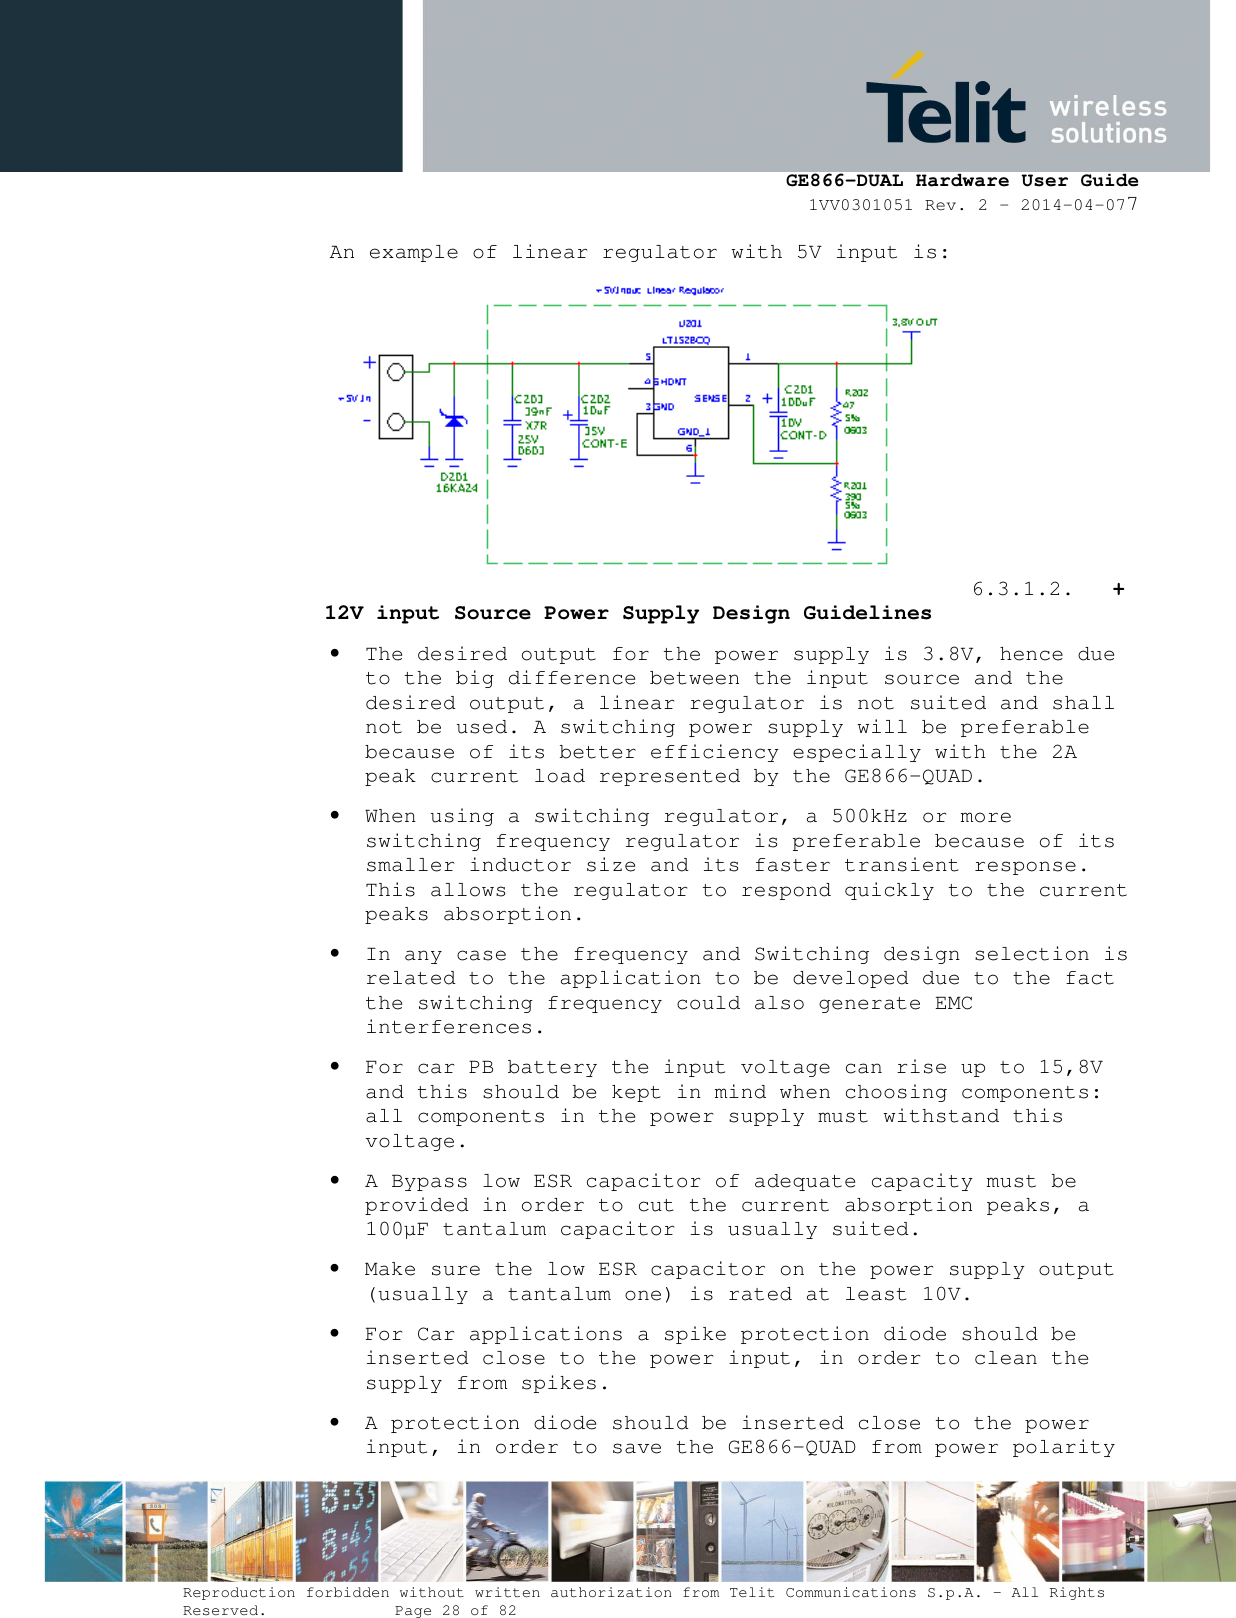      GE866-DUAL Hardware User Guide 1VV0301051 Rev. 2 – 2014-04-077  Reproduction forbidden without written authorization from Telit Communications S.p.A. - All Rights Reserved.    Page 28 of 82 Mod. 0805 2011-07 Rev.2 An example of linear regulator with 5V input is:         6.3.1.2. + 12V input Source Power Supply Design Guidelines • The desired output for the power supply is 3.8V, hence due to the big difference between the input source and the desired output, a linear regulator is not suited and shall not be used. A switching power supply will be preferable because of its better efficiency especially with the 2A peak current load represented by the GE866-QUAD. • When using a switching regulator, a 500kHz or more switching frequency regulator is preferable because of its smaller inductor size and its faster transient response. This allows the regulator to respond quickly to the current peaks absorption.  • In any case the frequency and Switching design selection is related to the application to be developed due to the fact the switching frequency could also generate EMC interferences. • For car PB battery the input voltage can rise up to 15,8V and this should be kept in mind when choosing components: all components in the power supply must withstand this voltage. • A Bypass low ESR capacitor of adequate capacity must be provided in order to cut the current absorption peaks, a 100µF tantalum capacitor is usually suited. • Make sure the low ESR capacitor on the power supply output (usually a tantalum one) is rated at least 10V. • For Car applications a spike protection diode should be inserted close to the power input, in order to clean the supply from spikes.  • A protection diode should be inserted close to the power input, in order to save the GE866-QUAD from power polarity 